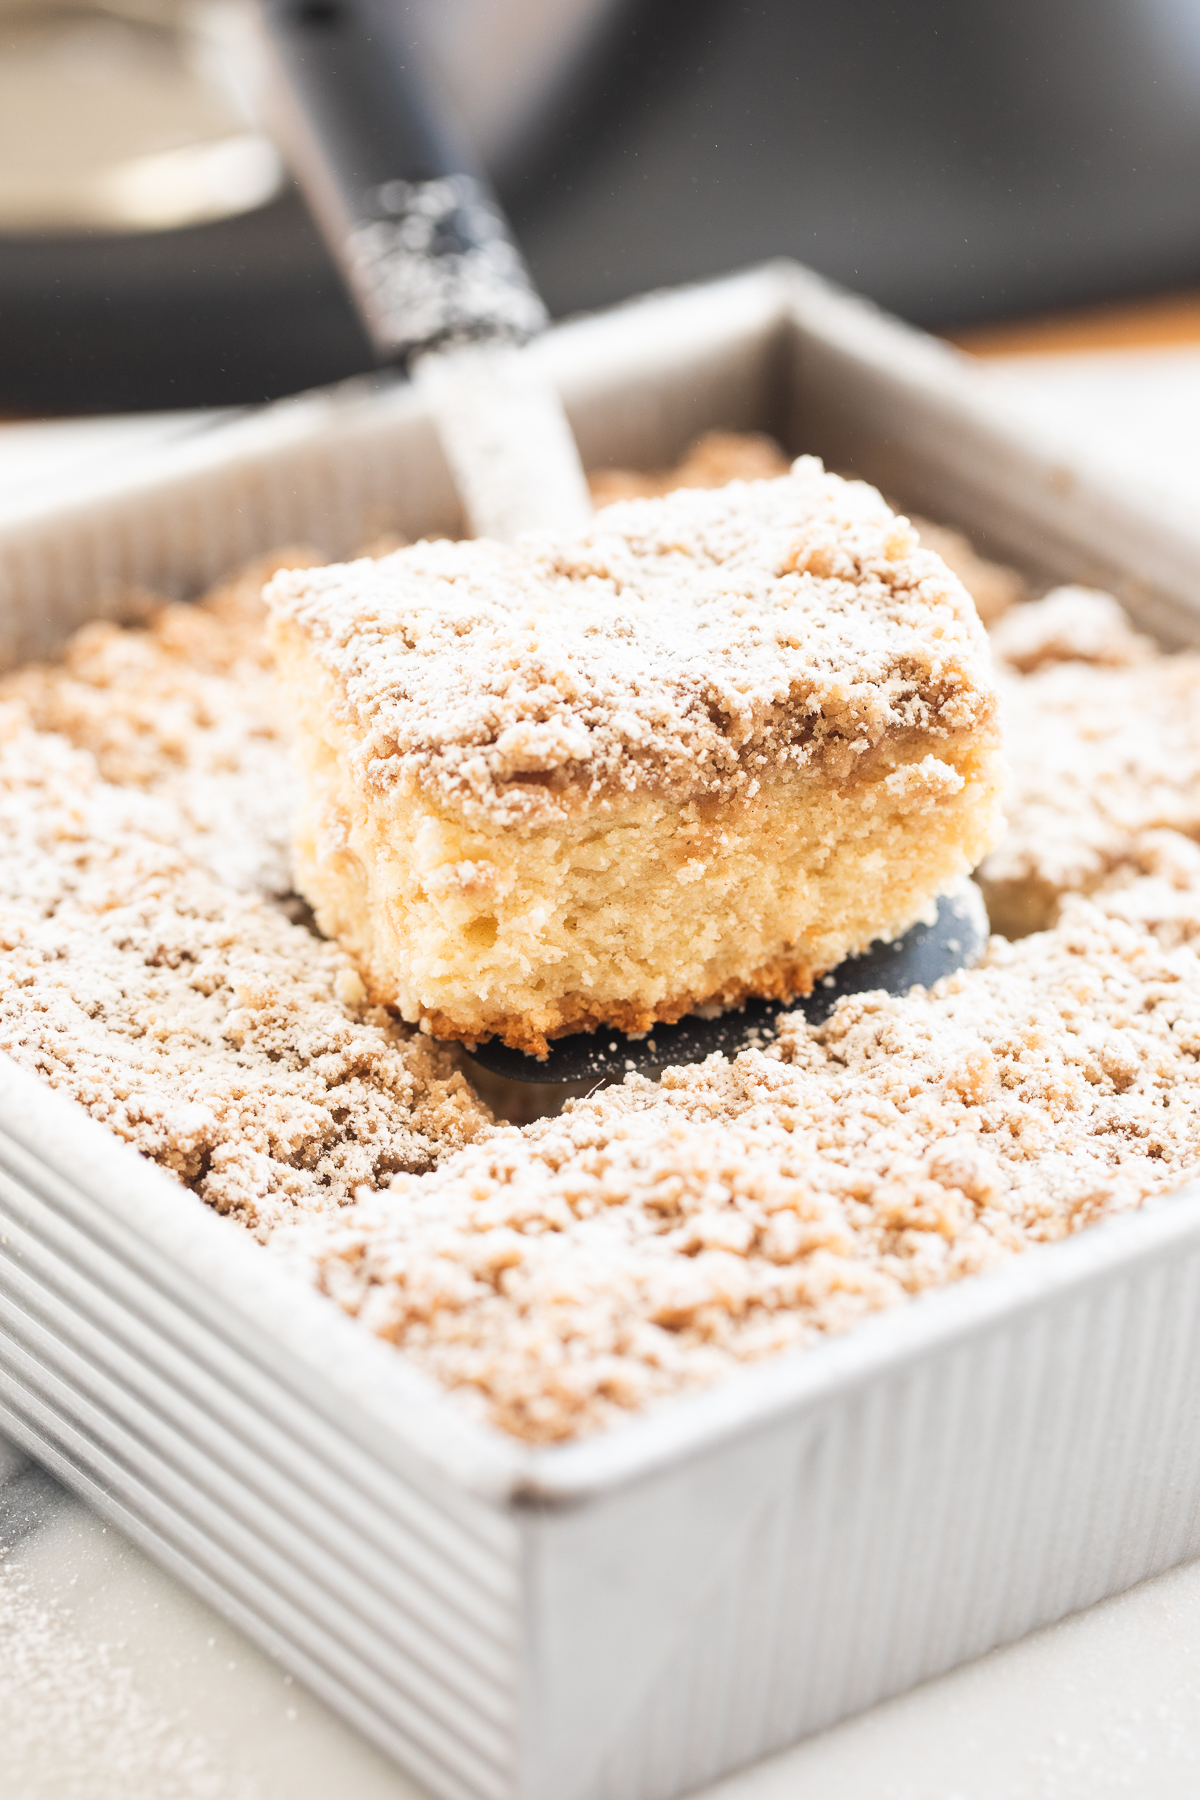 spatula holding a piece of crumb cake over a sheet pan of crumb cake slices.